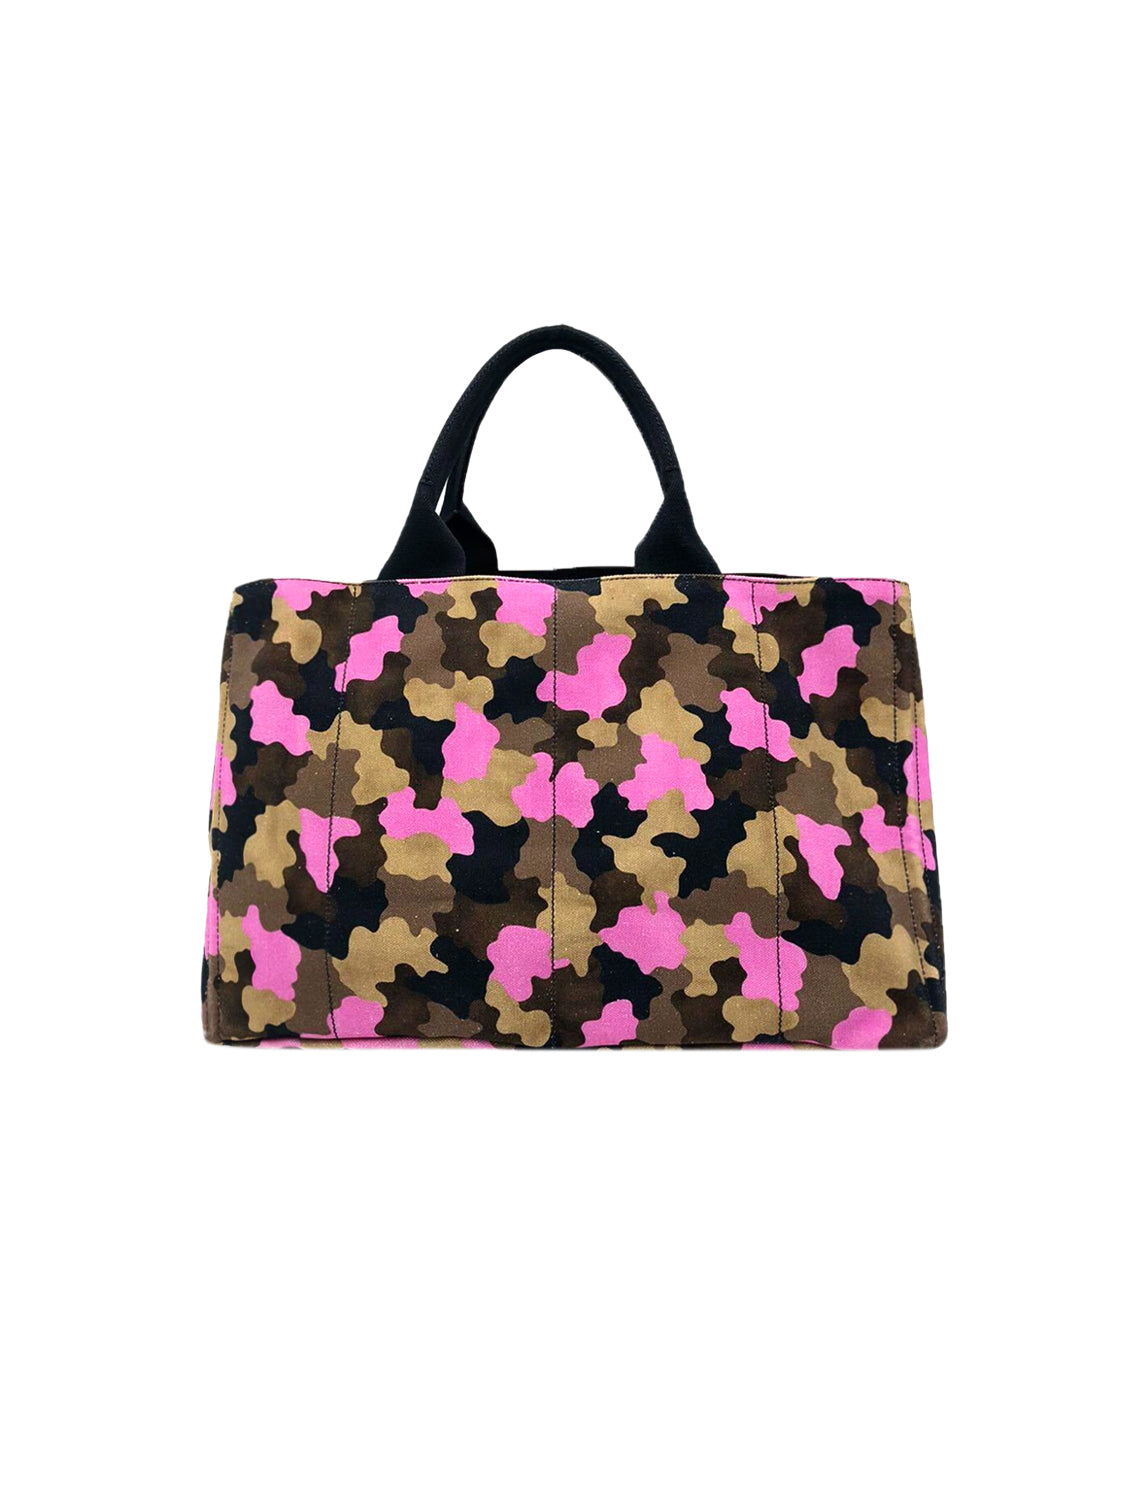 Prada 2000s Limited Edition Pink Camouflage Canvas Tote